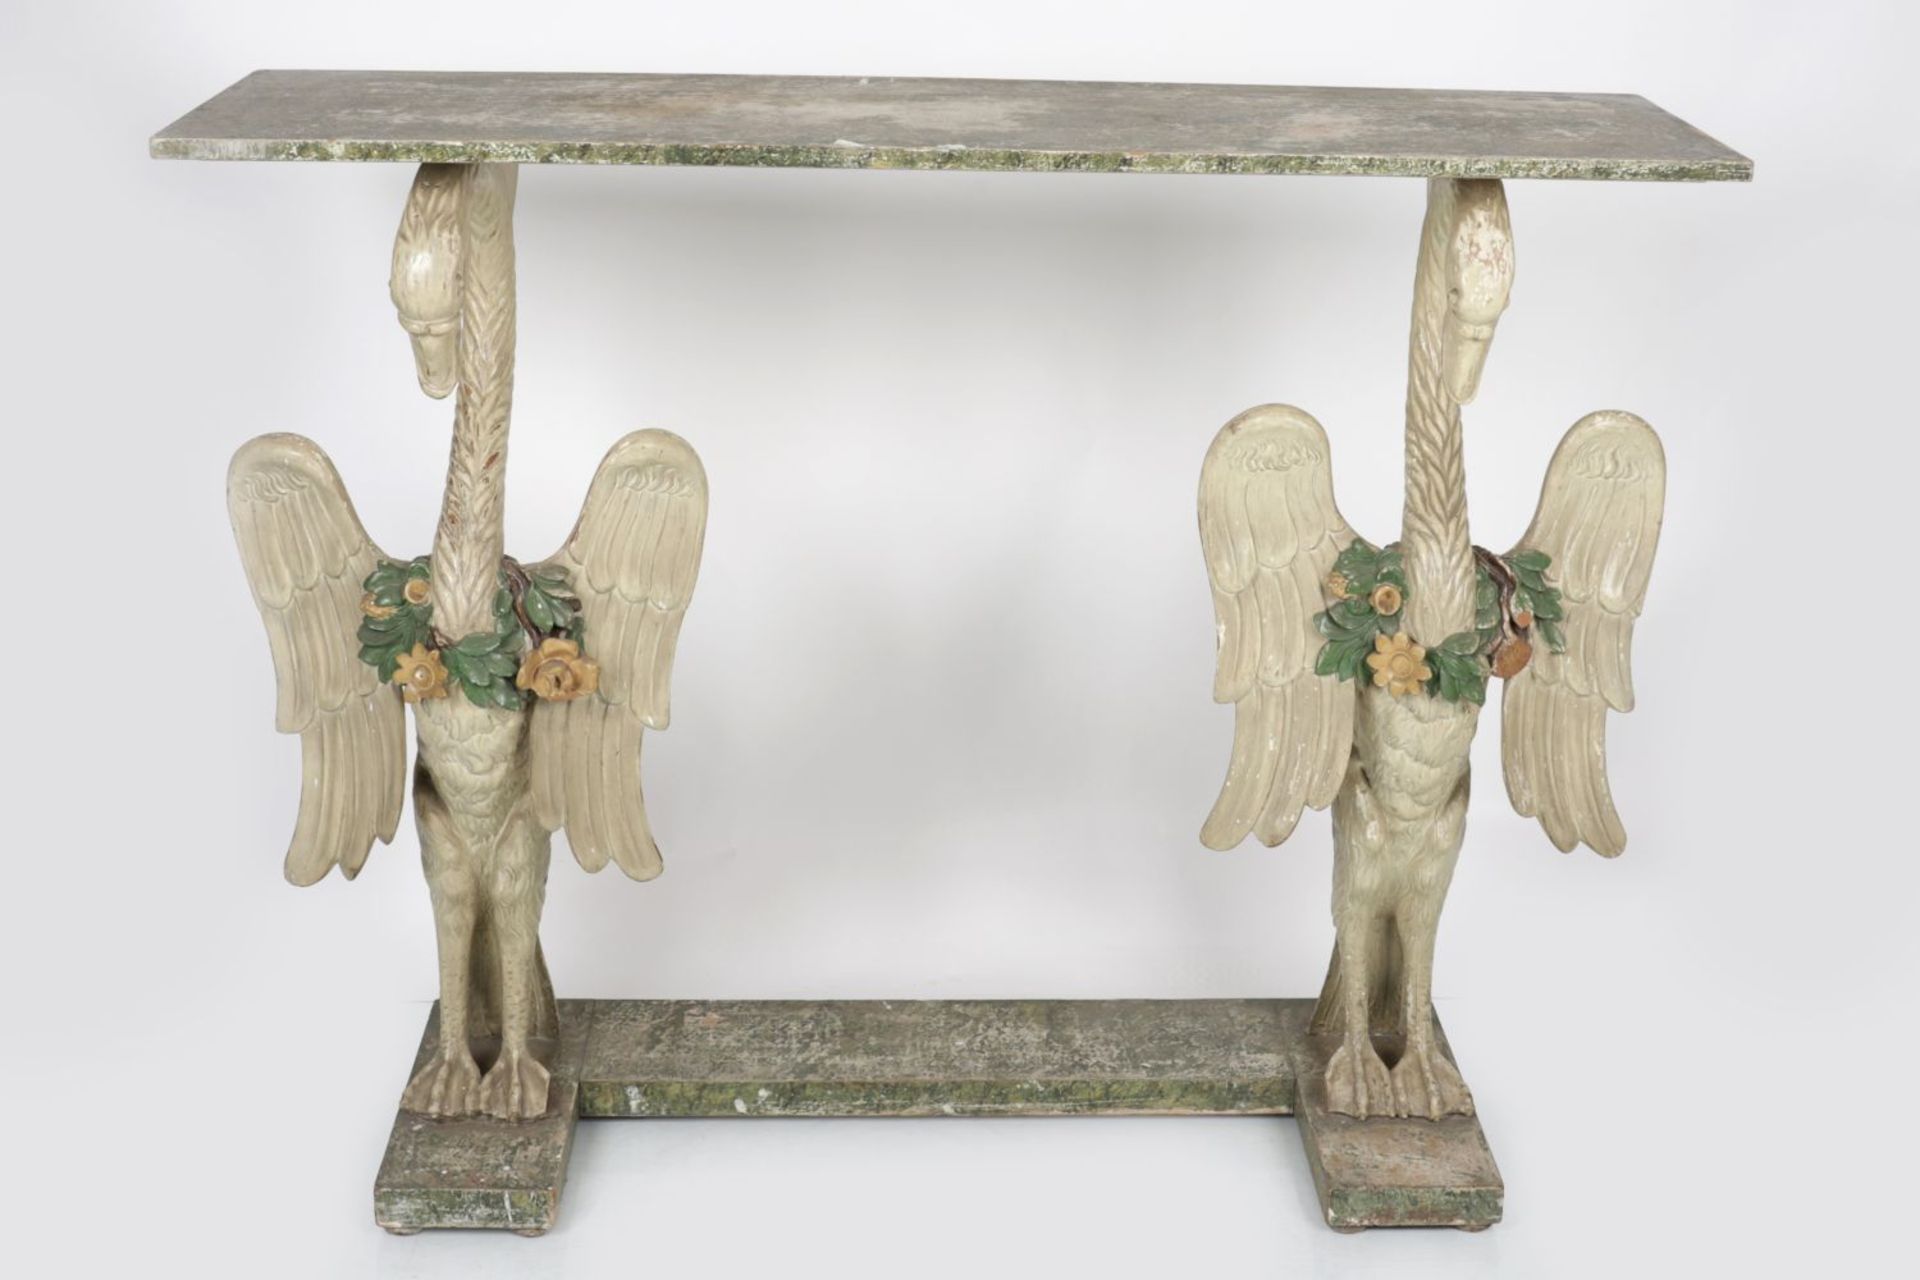 19TH-CENTURY PAINTED FIGURAL CONSOLE TABLE